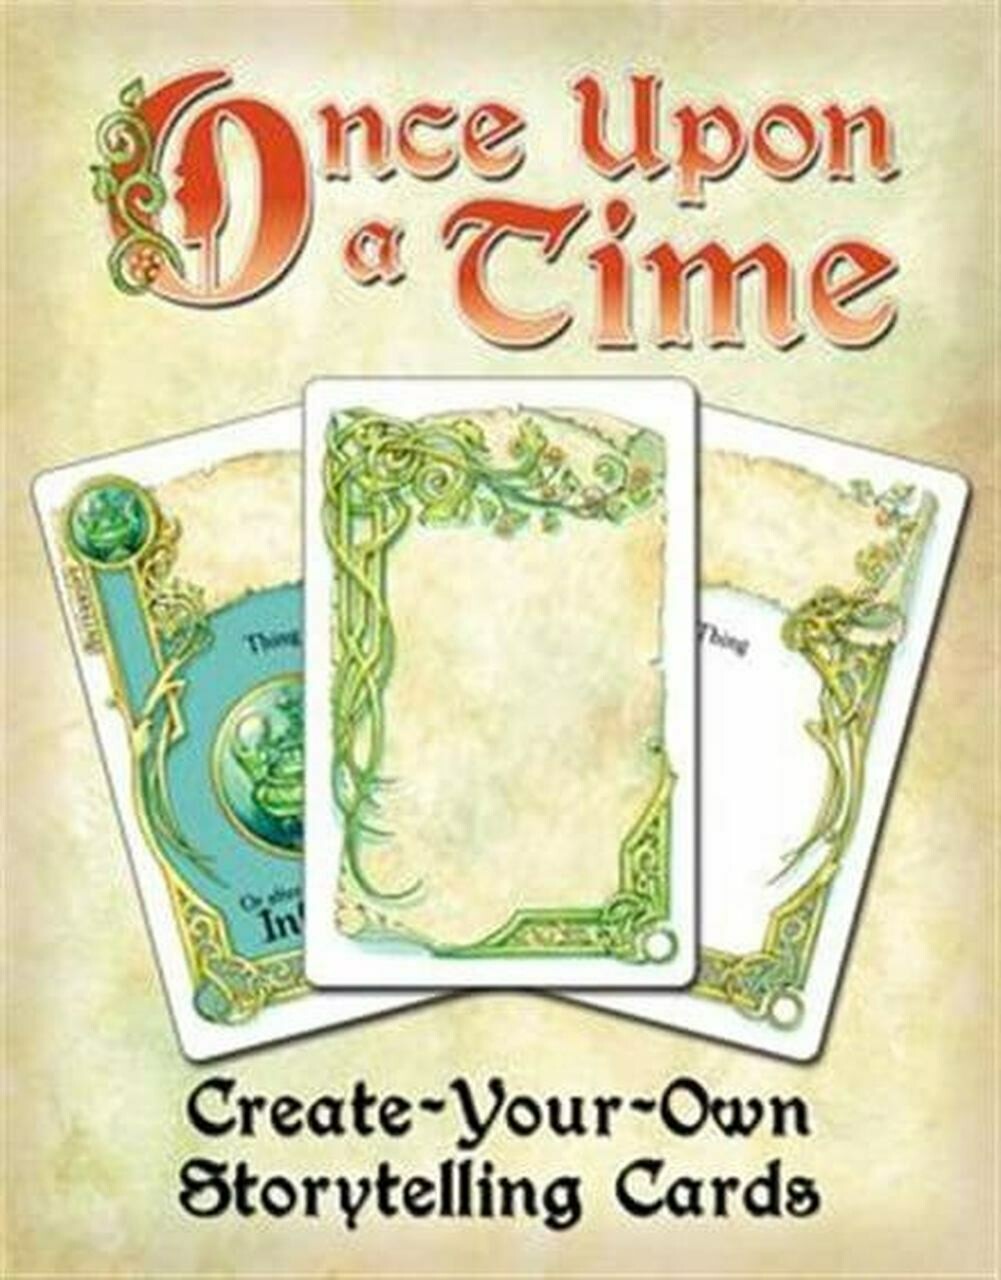 Once Upon A Time: Create-Your-Own Storytelling Cards